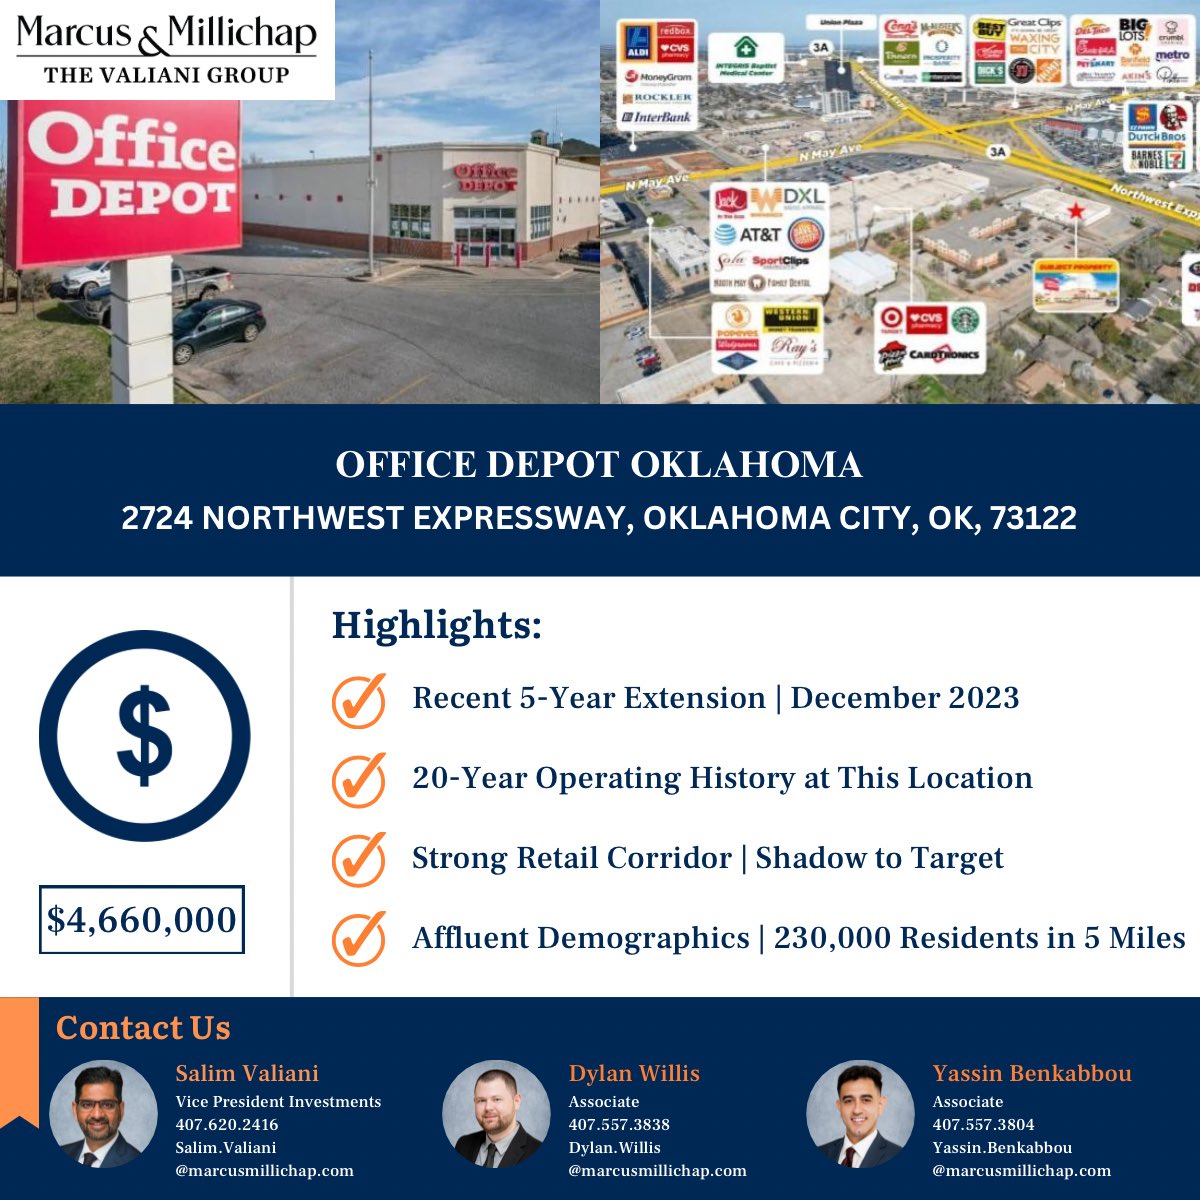 The Valiani Group is delighted to introduce an exclusive net lease offering in Oklahoma City, Oklahoma. For further details, please contact Salim Valiani, Dylan Willis, Yassin Benkabbou, or any member of The Valiani Group team.

@salimvaliani 407.620.2416

#cre #BusinessStrategy